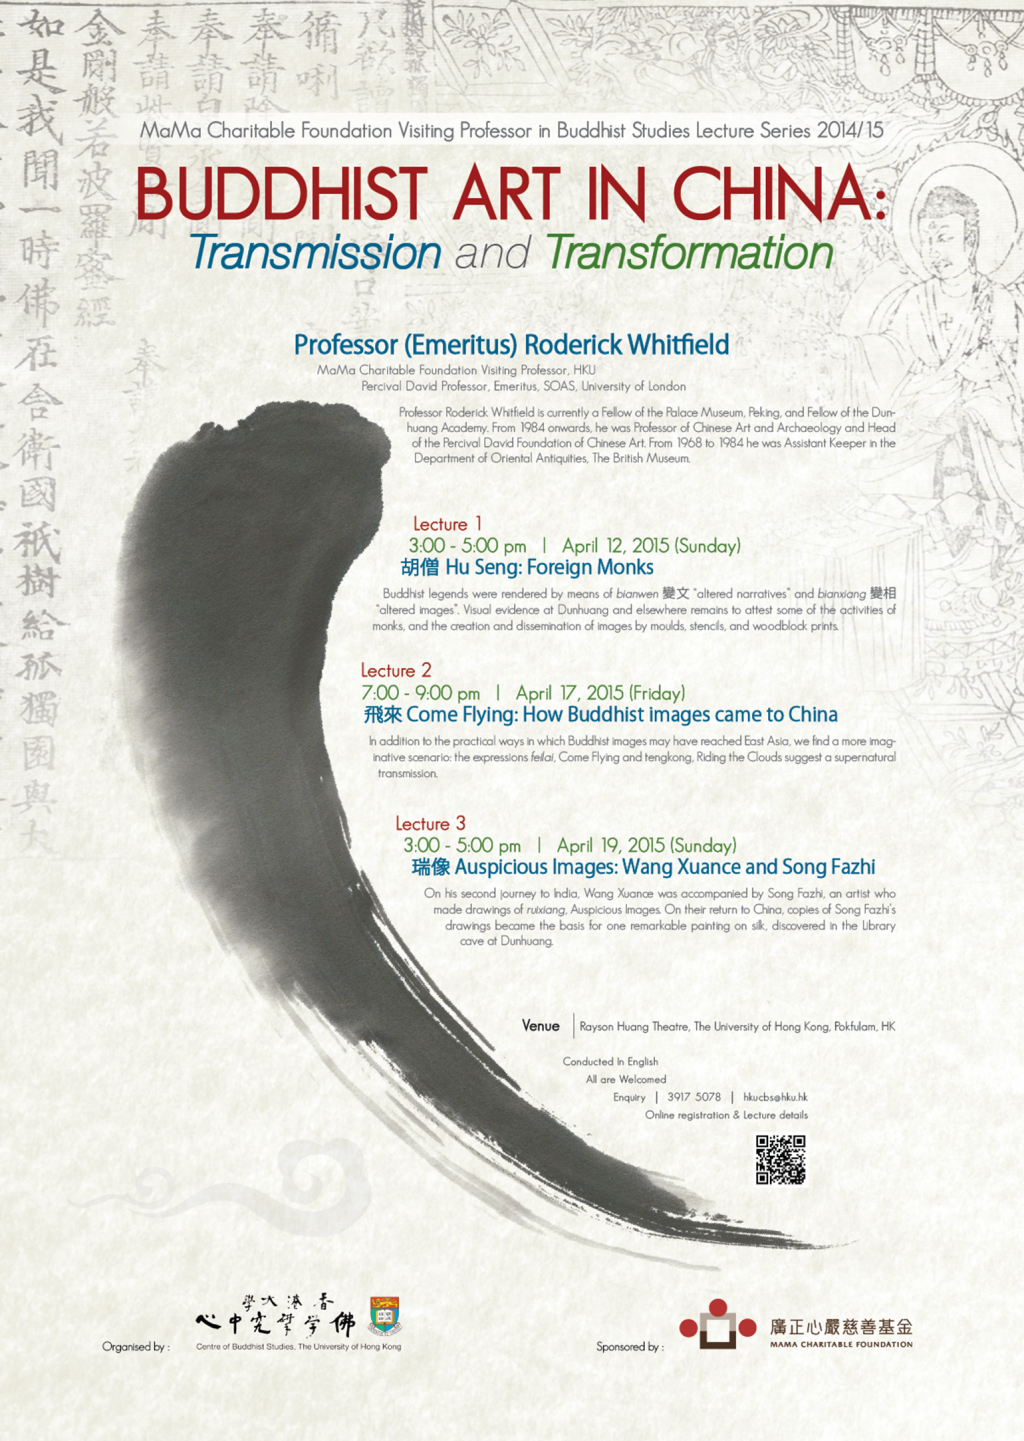 Buddhist Art in China - Transmission and Transformation